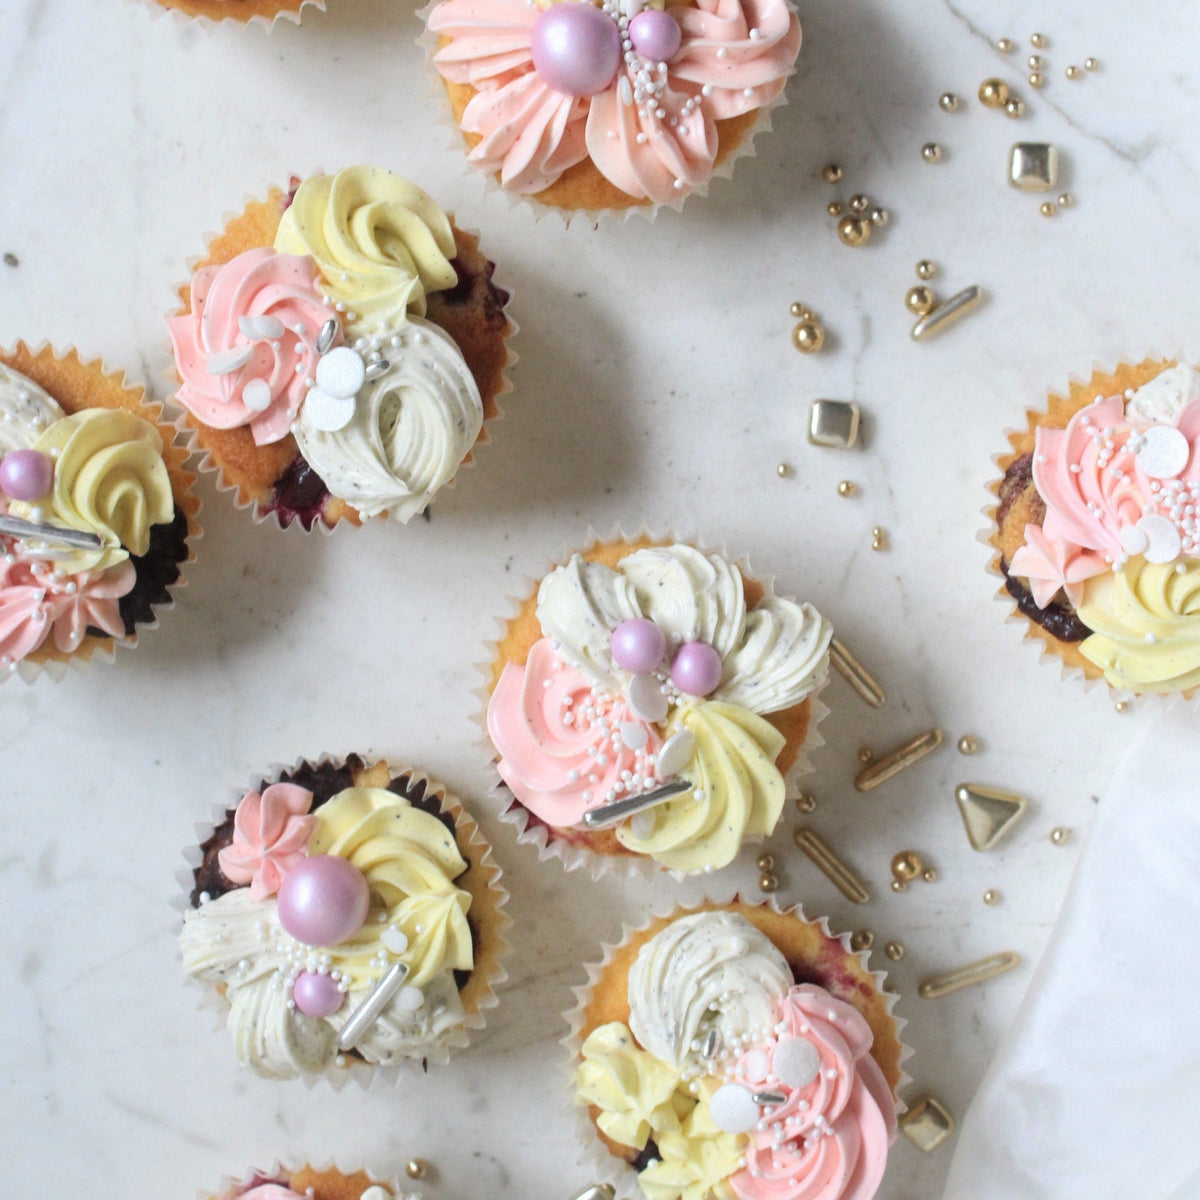 Cupcakes - our smallest sweet treats with pastel mixed buttercream piping!